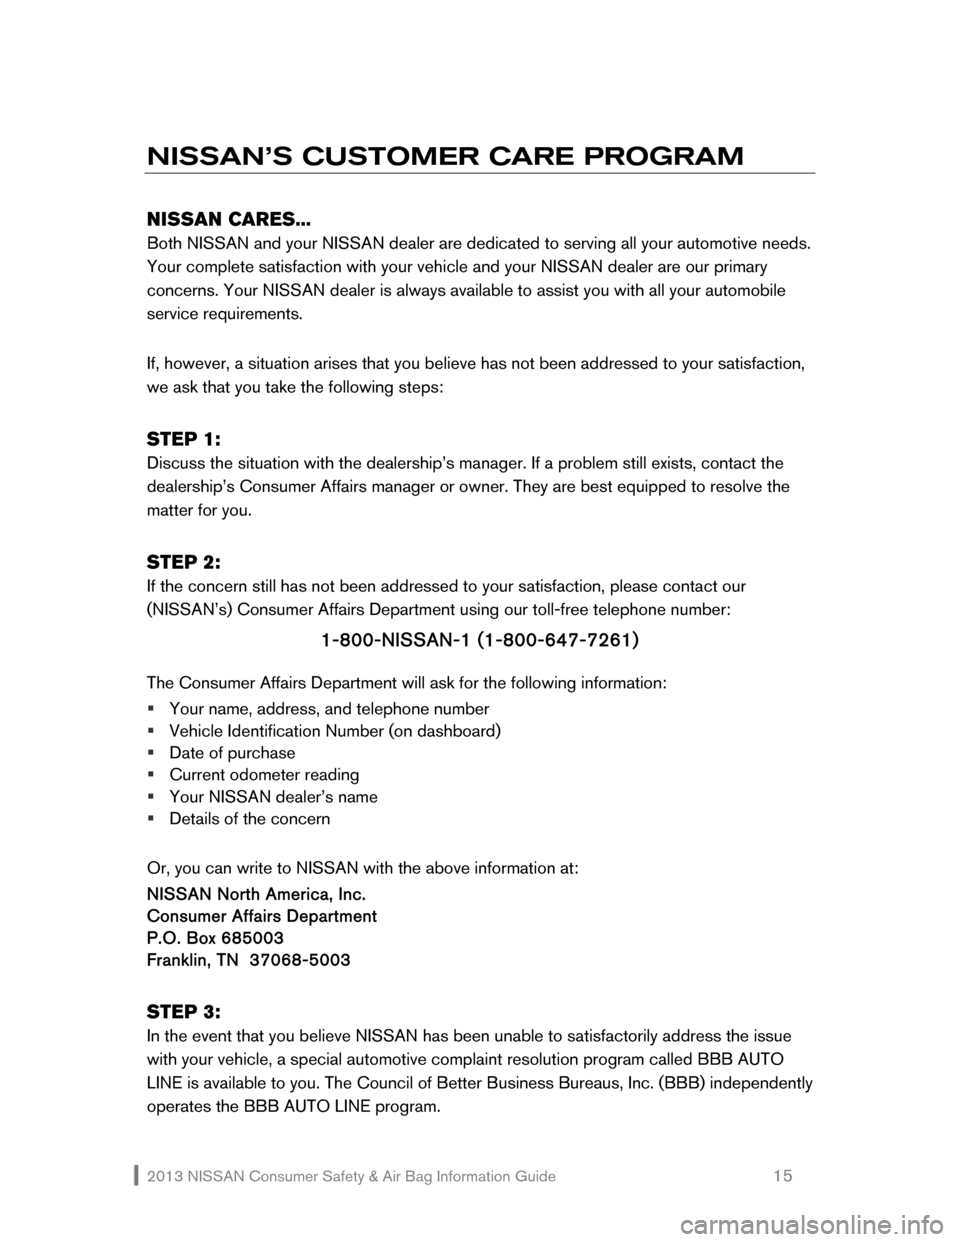 NISSAN MURANO 2013 2.G Consumer Safety Air Bag Information Guide 2013 NISSAN Consumer Safety & Air Bag Information Guide                                                   15 
NISSAN’S CUSTOMER CARE PROGRAM 
 
NISSAN CARES... 
Both NISSAN and your NISSAN dealer ar